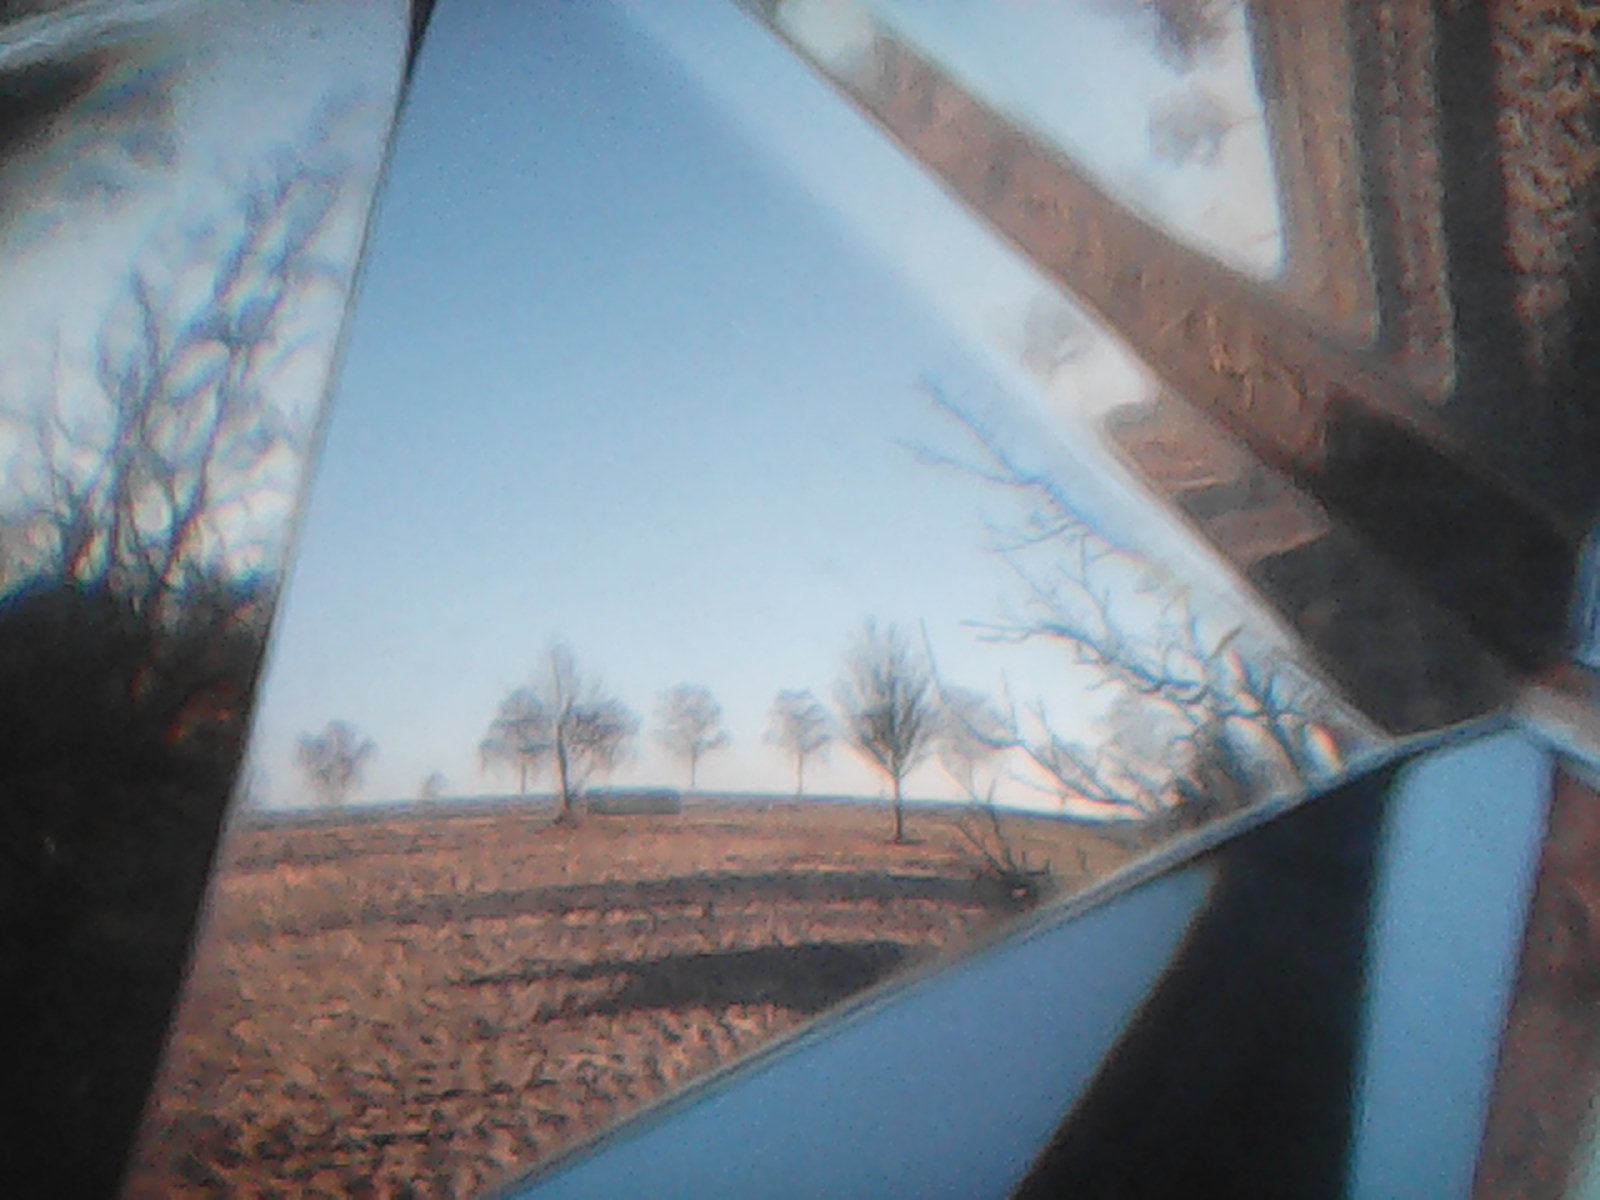 A meadow, viewed through a prism.